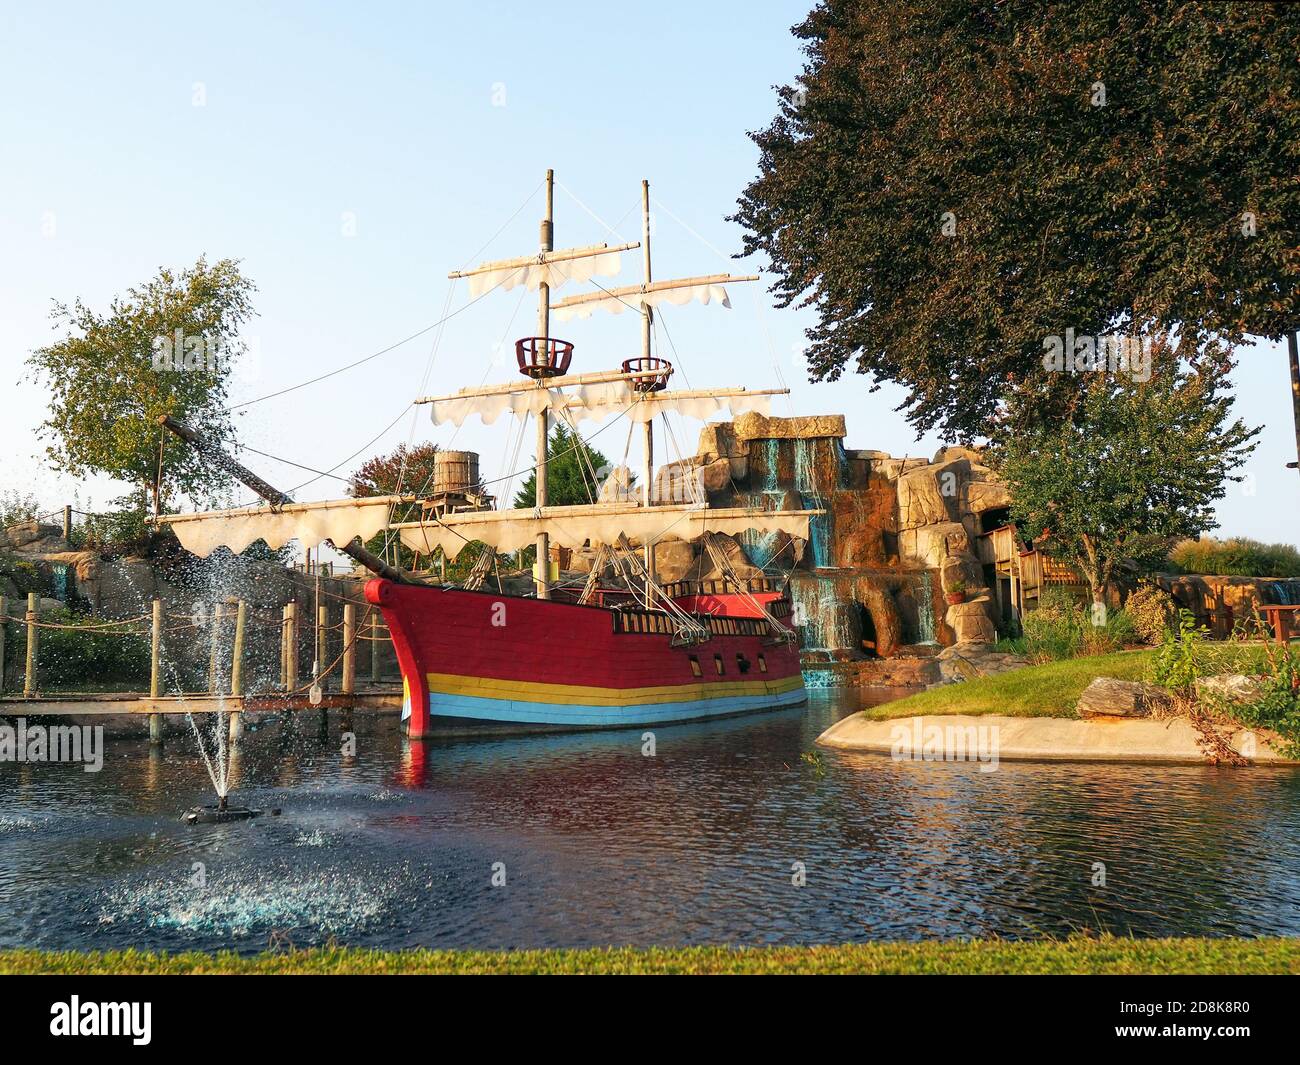 LANCASTER, PENNSYLVANIA - SEPTEMBER 22, 2020: A replica pirate ship sits in a lagoon with a fountain at Professor Hacker’s Lost Treasure Golf Course, Stock Photo